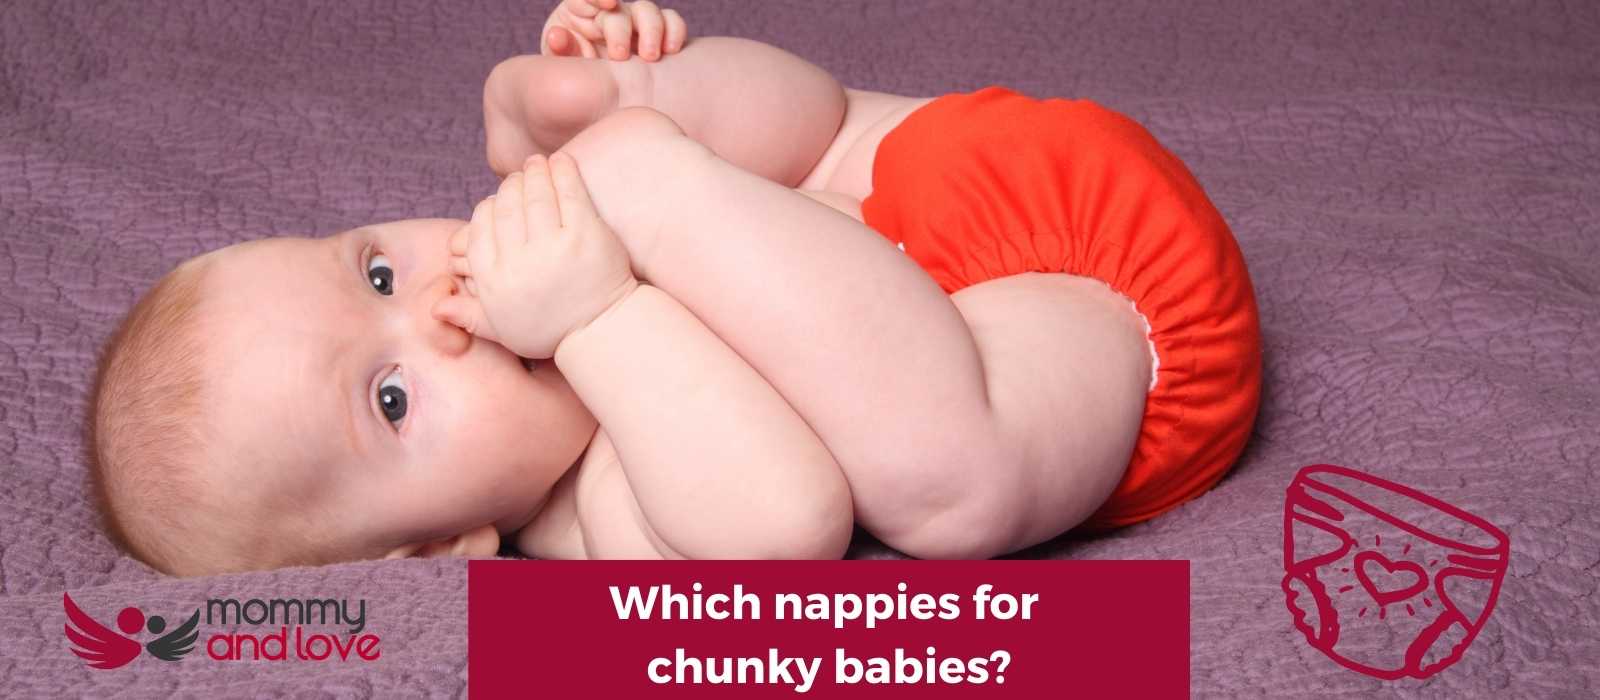 Which nappies for chunky babies